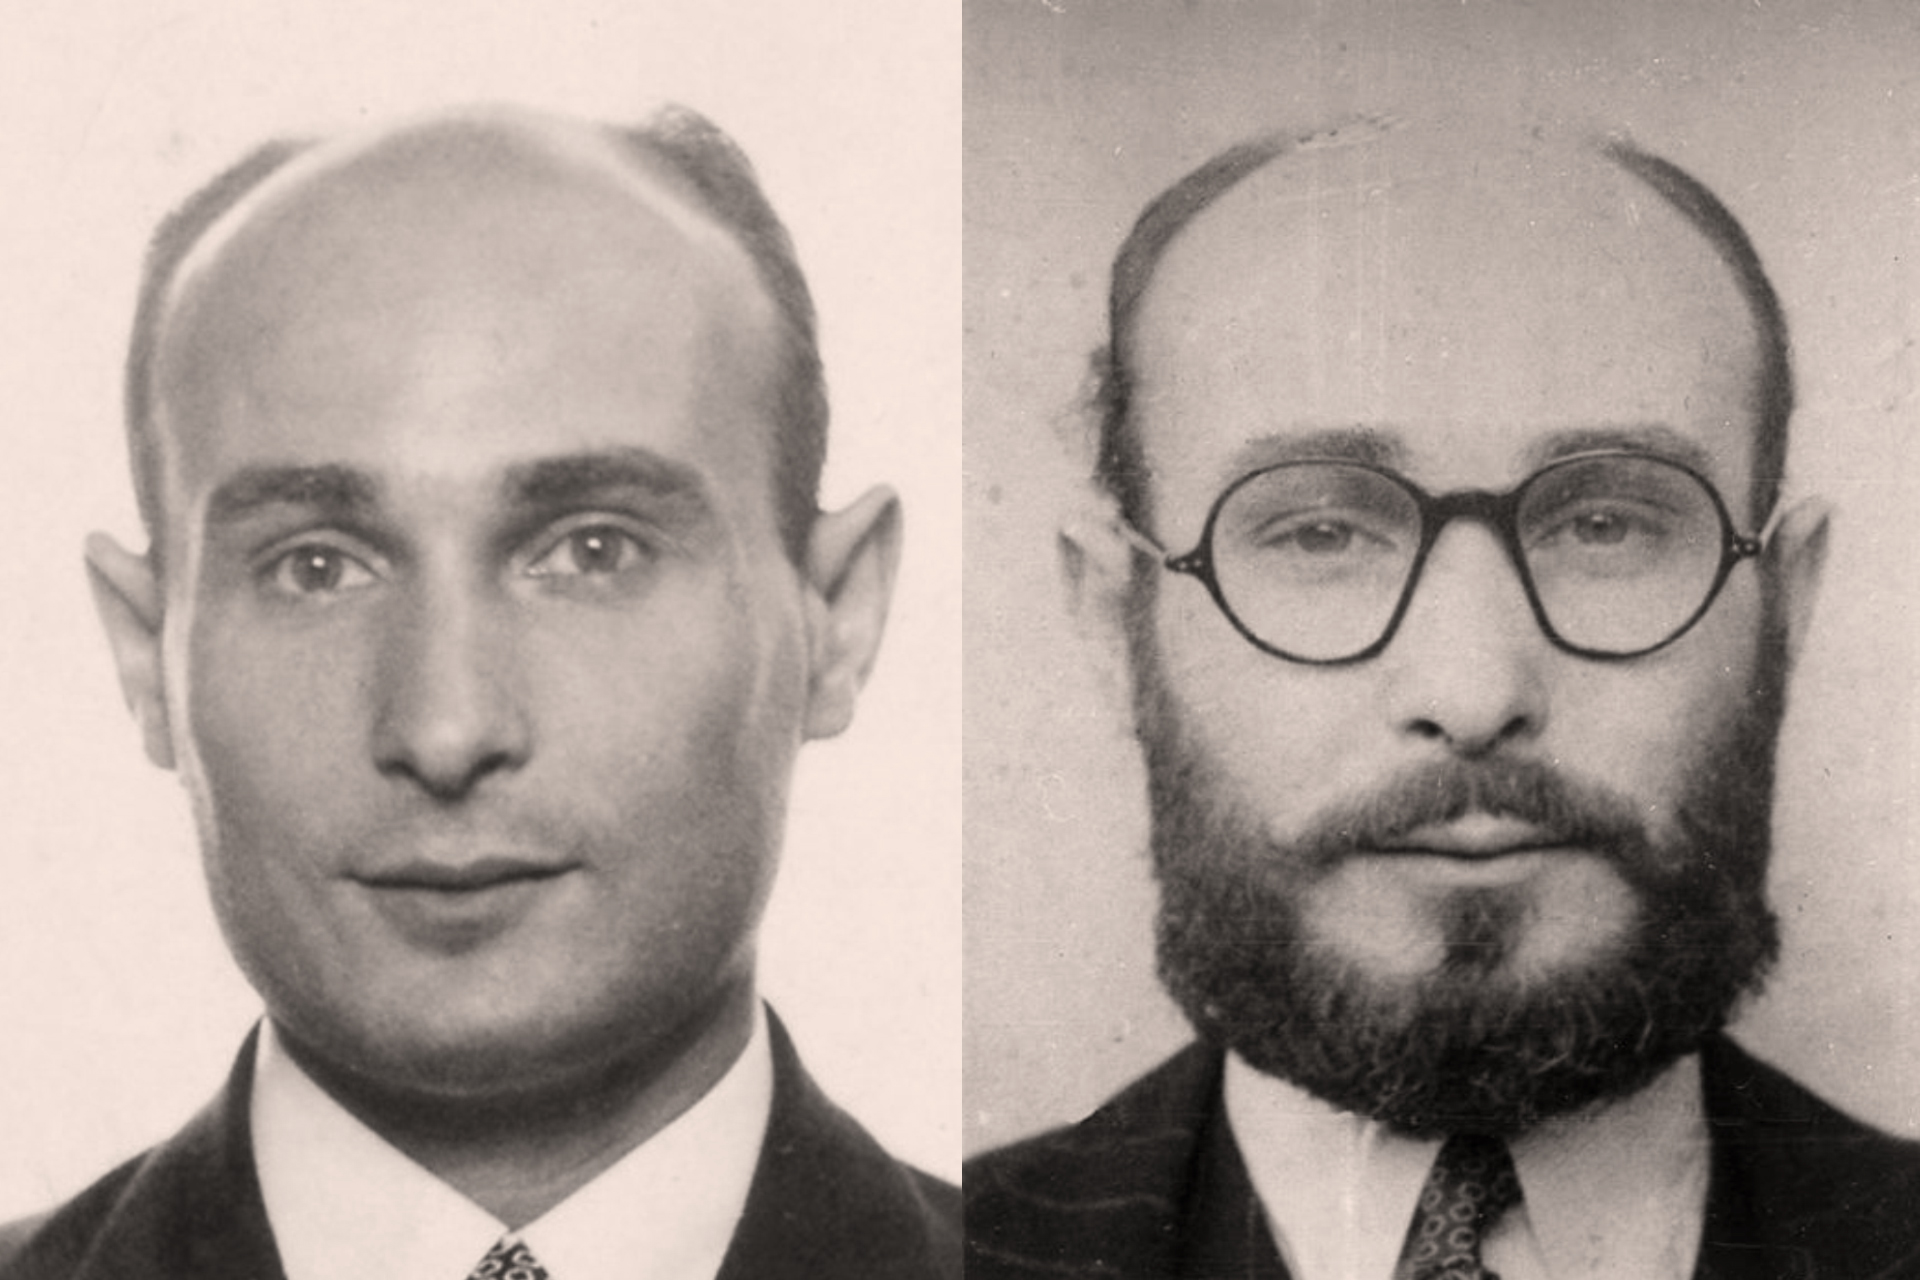 A collage of two photos of the same man, Juan Pujol Garcia “Garbo”, on the left side he is his regular self, on the right side he is wearing a disguise in the form of glasses and beard.